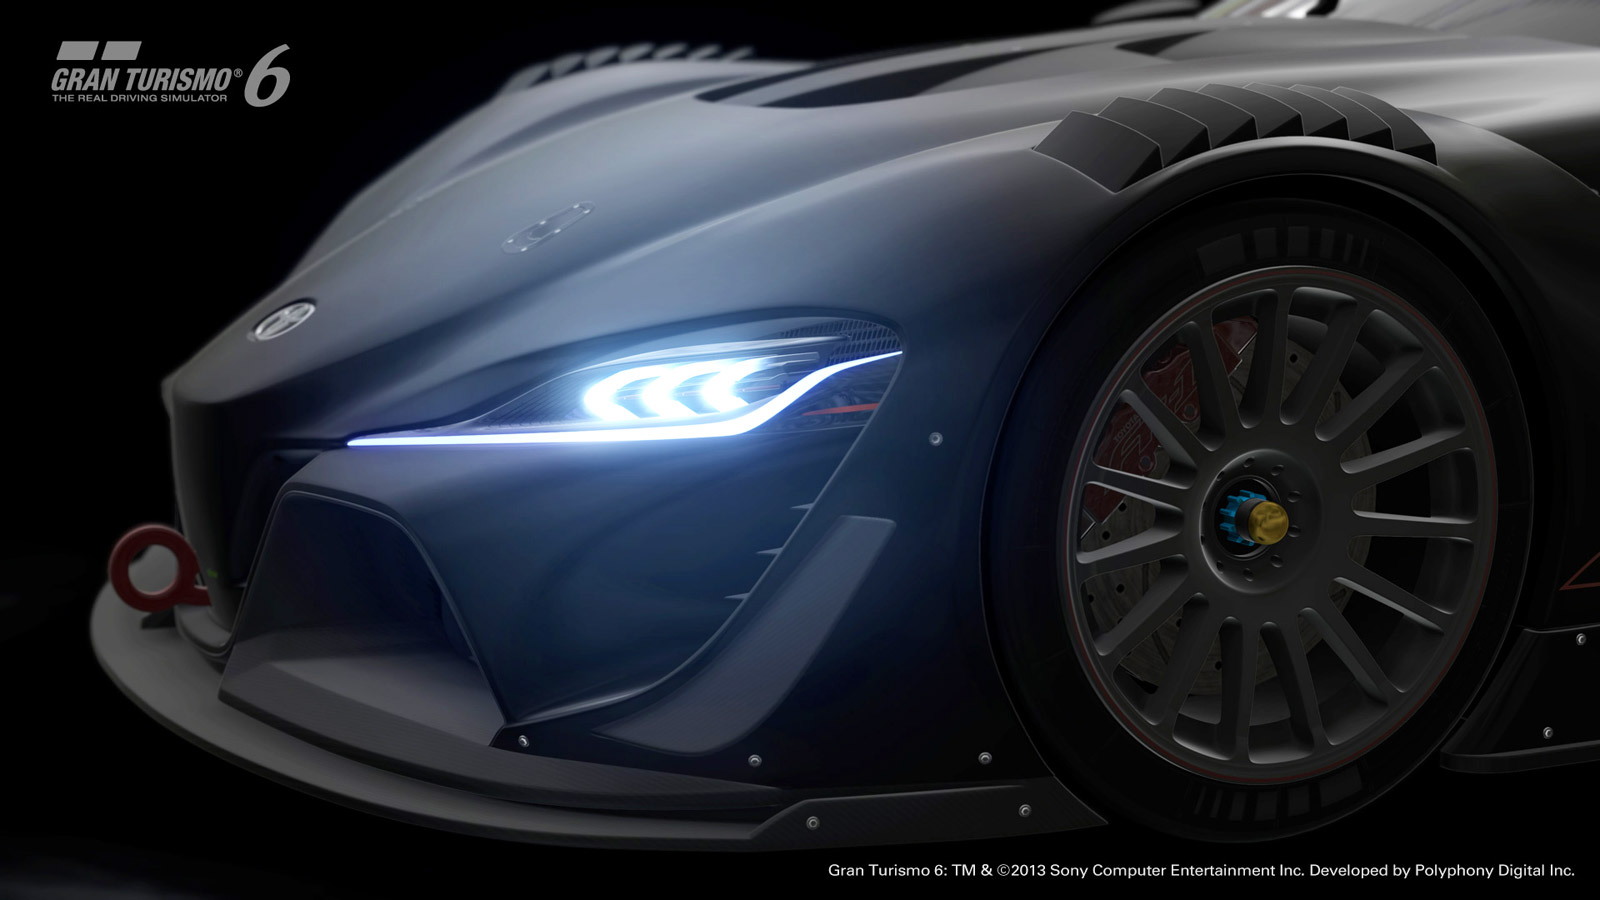 Teaser for Toyota FT-1 Vision Gran Turismo concept